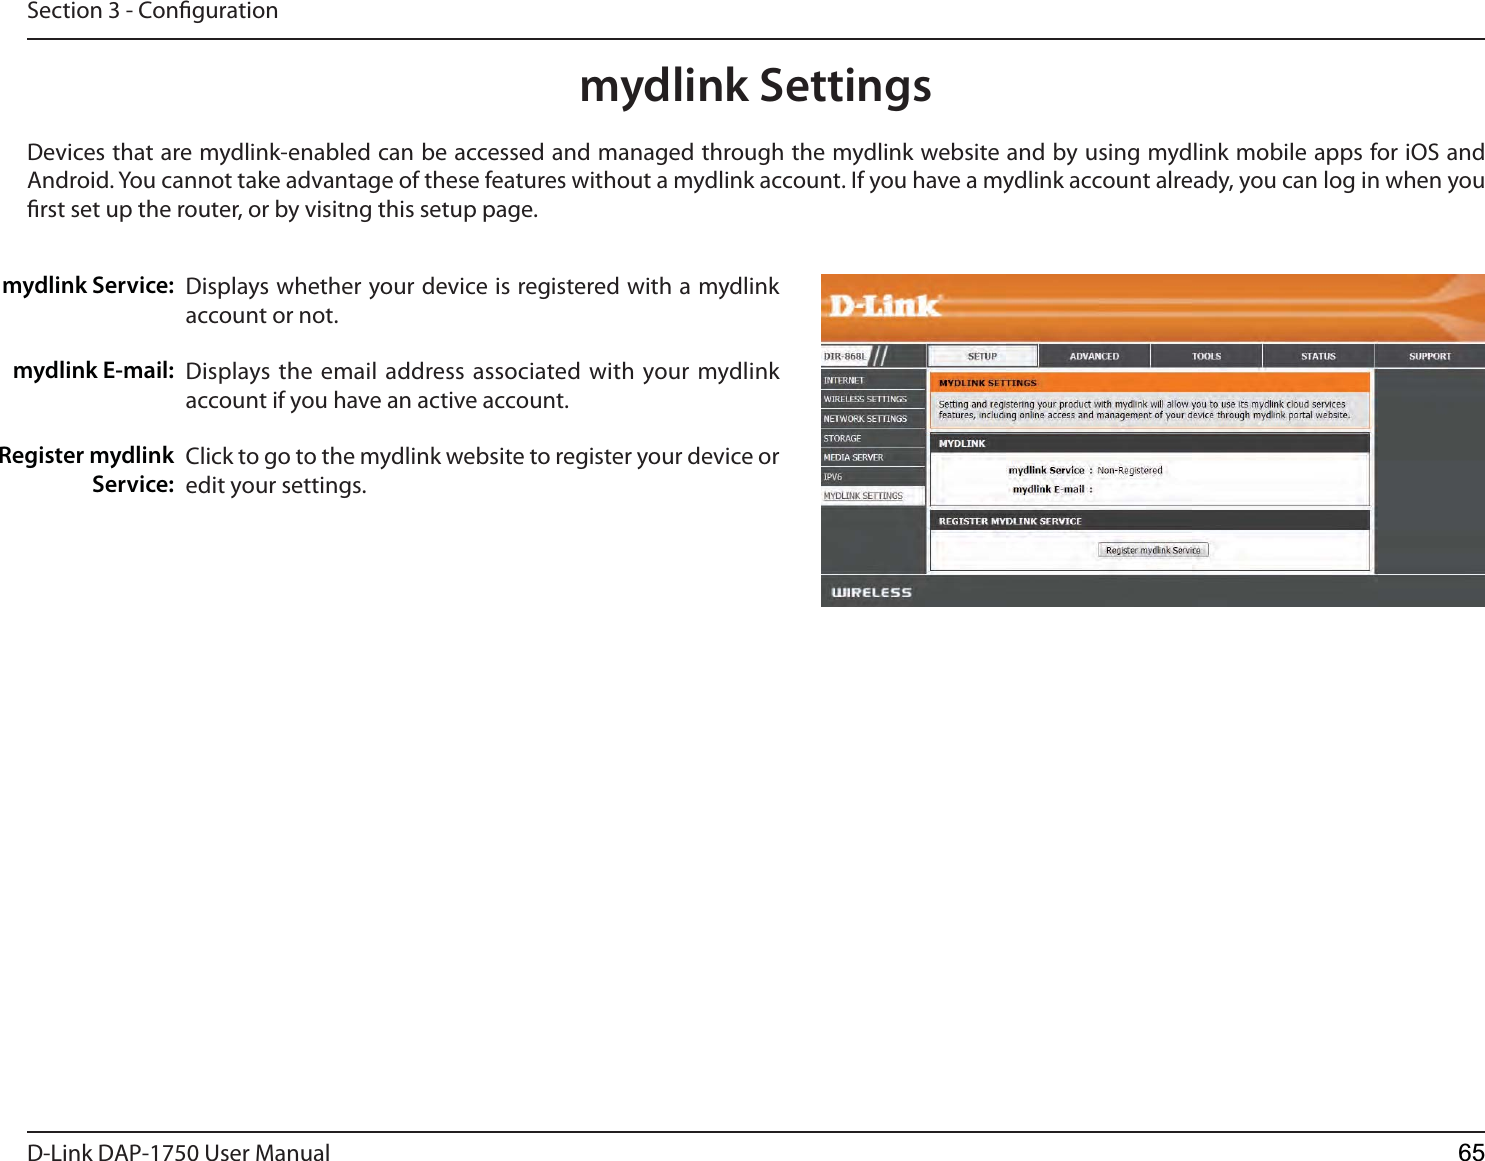 D-Link %&quot;1 User ManualSection 3 - Congurationmydlink SettingsDisplays whether your device is registered with a mydlink account or not.Displays the email address associated with your mydlink account if you have an active account.Click to go to the mydlink website to register your device or edit your settings.mydlink Service:mydlink E-mail:Register mydlink Service:Devices that are mydlink-enabled can be accessed and managed through the mydlink website and by using mydlink mobile apps for iOS and Android. You cannot take advantage of these features without a mydlink account. If you have a mydlink account already, you can log in when you rst set up the router, or by visitng this setup page.65